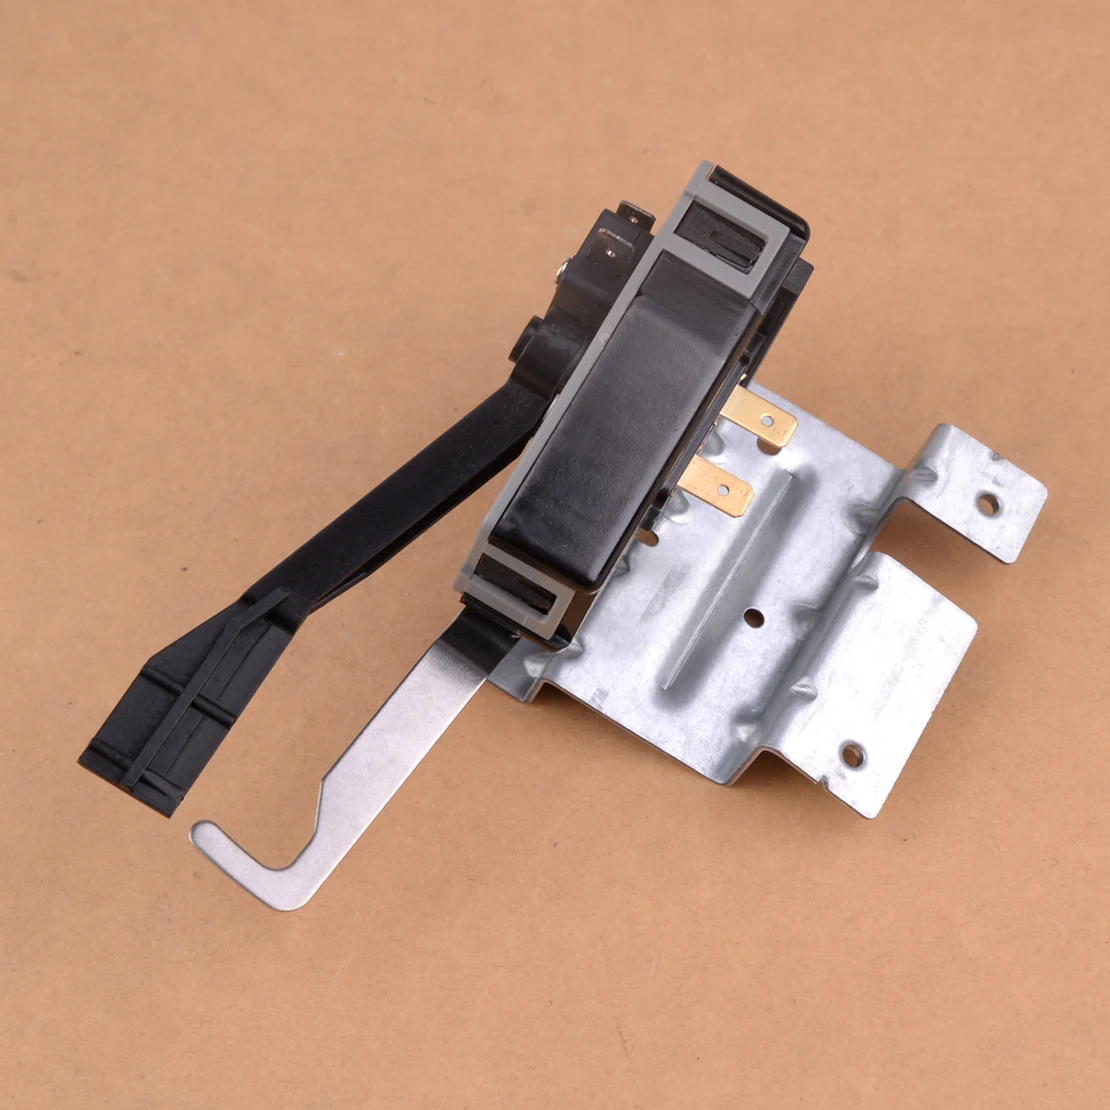 

LETAOSK 1Pc Washer Door Lock Interlock Switch Assembly 3205646 134101800 AP2108159 5303306138 Fit for Electrolux Westinghouse